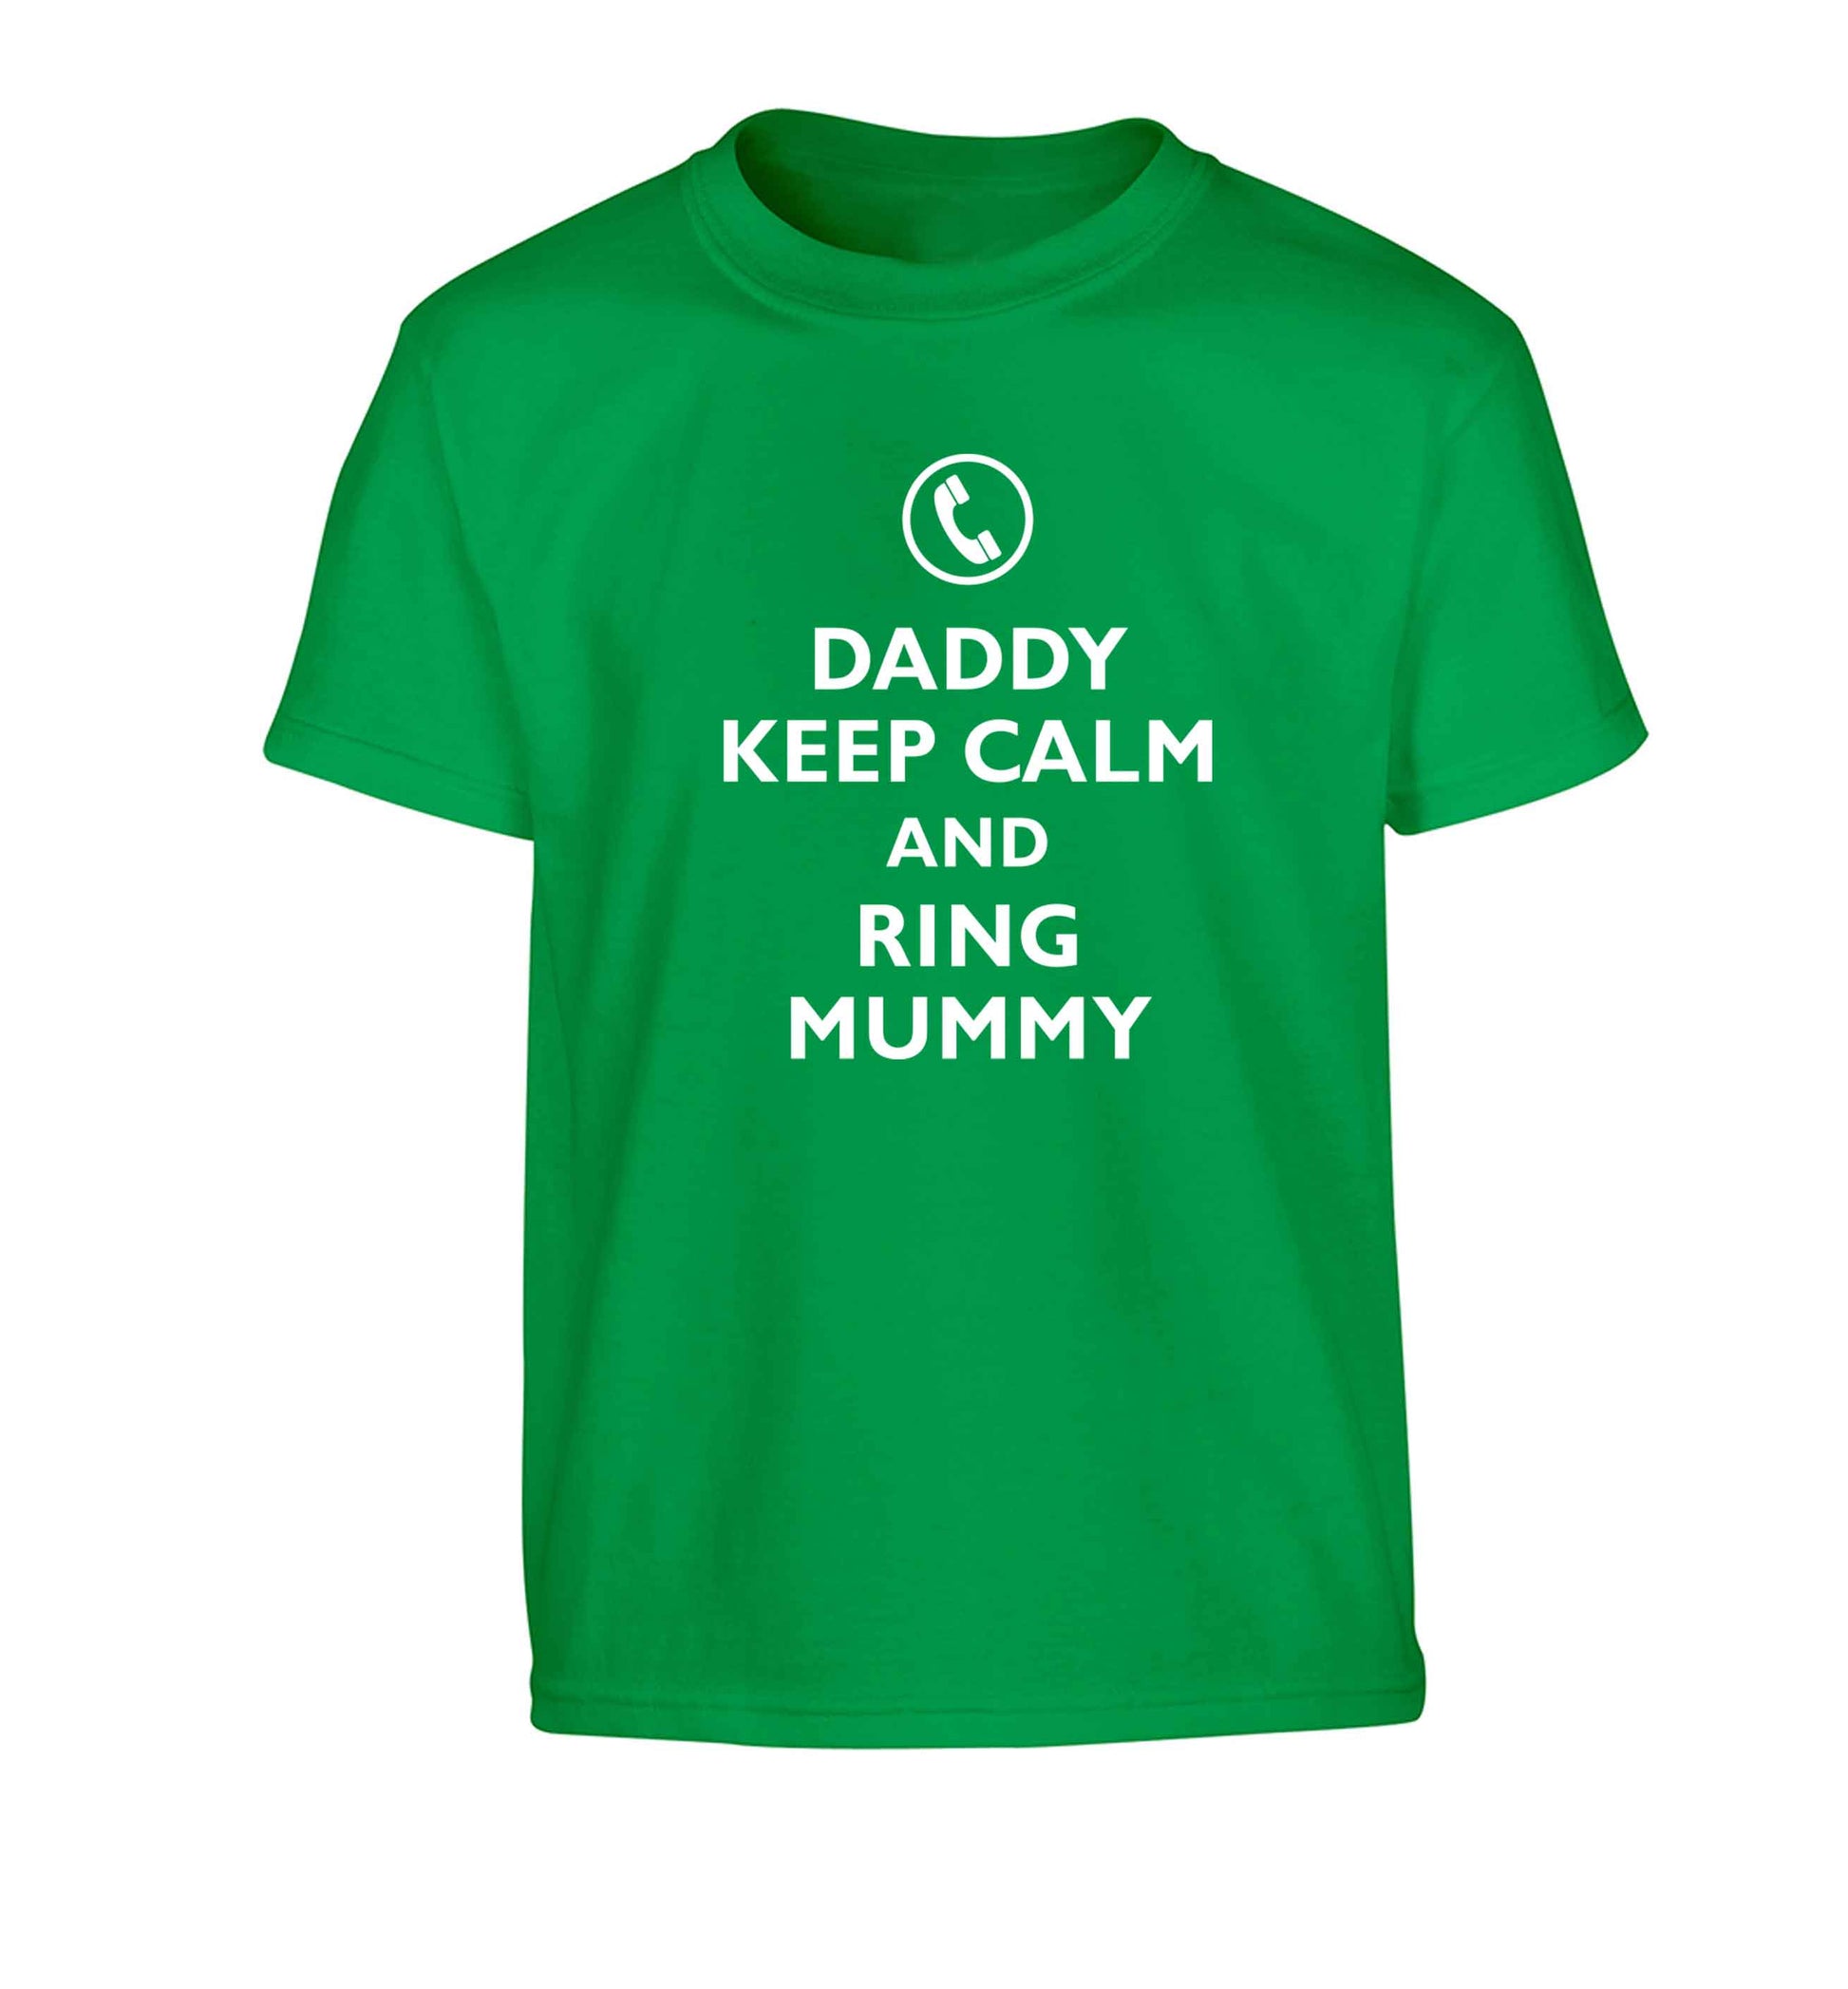 Daddy keep calm and ring mummy Children's green Tshirt 12-13 Years